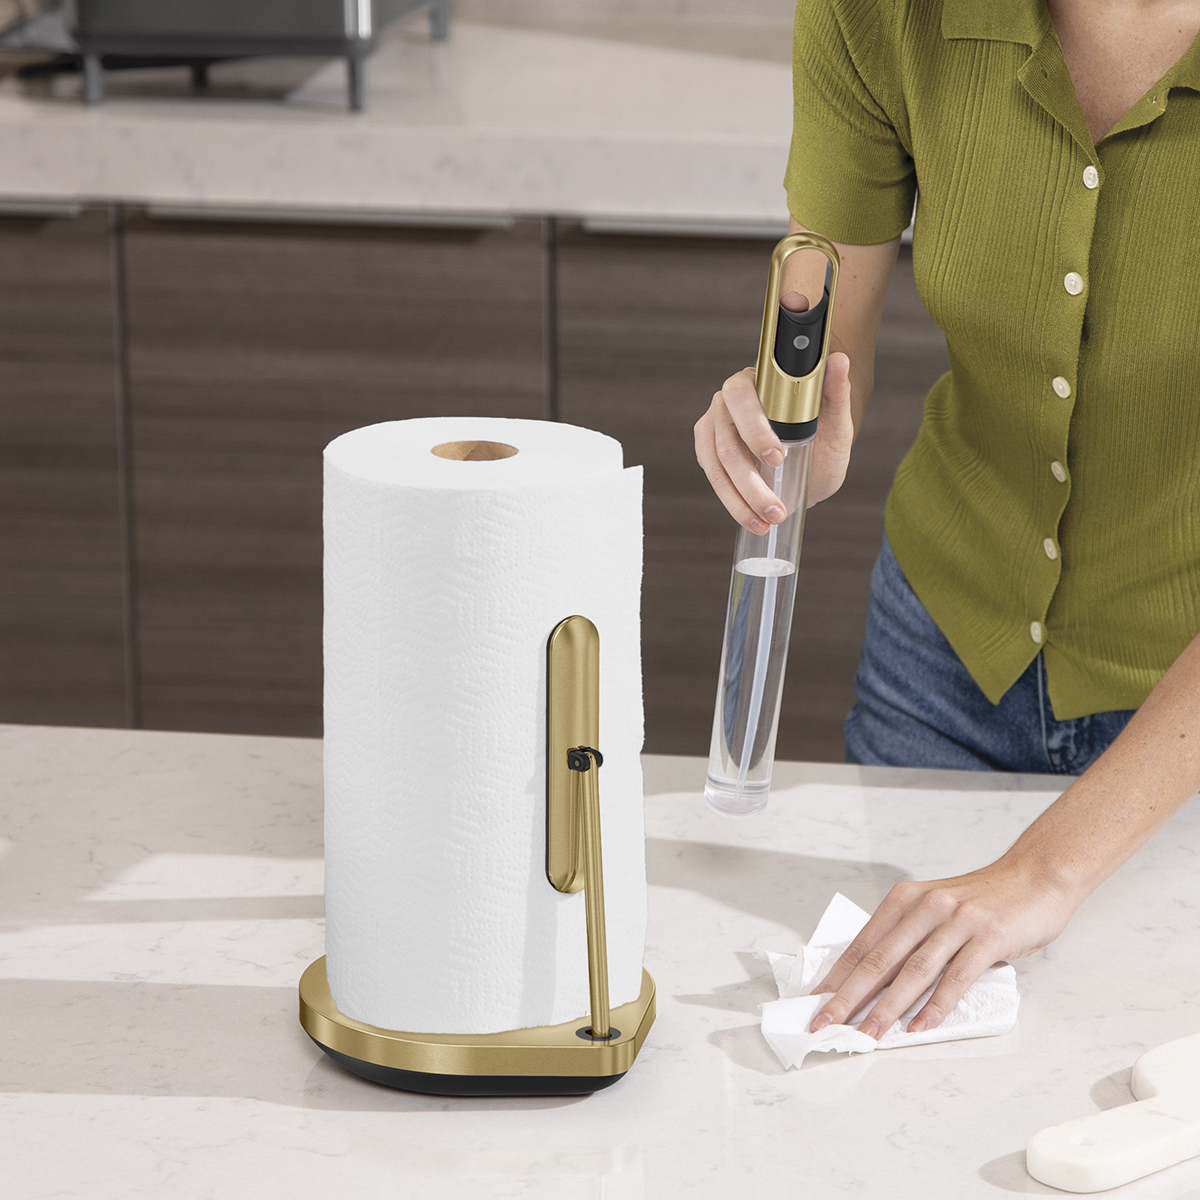 https://www.containerstore.com/catalogimages/479113/10093173-sh-paper-towel-spray-pump-b.jpg